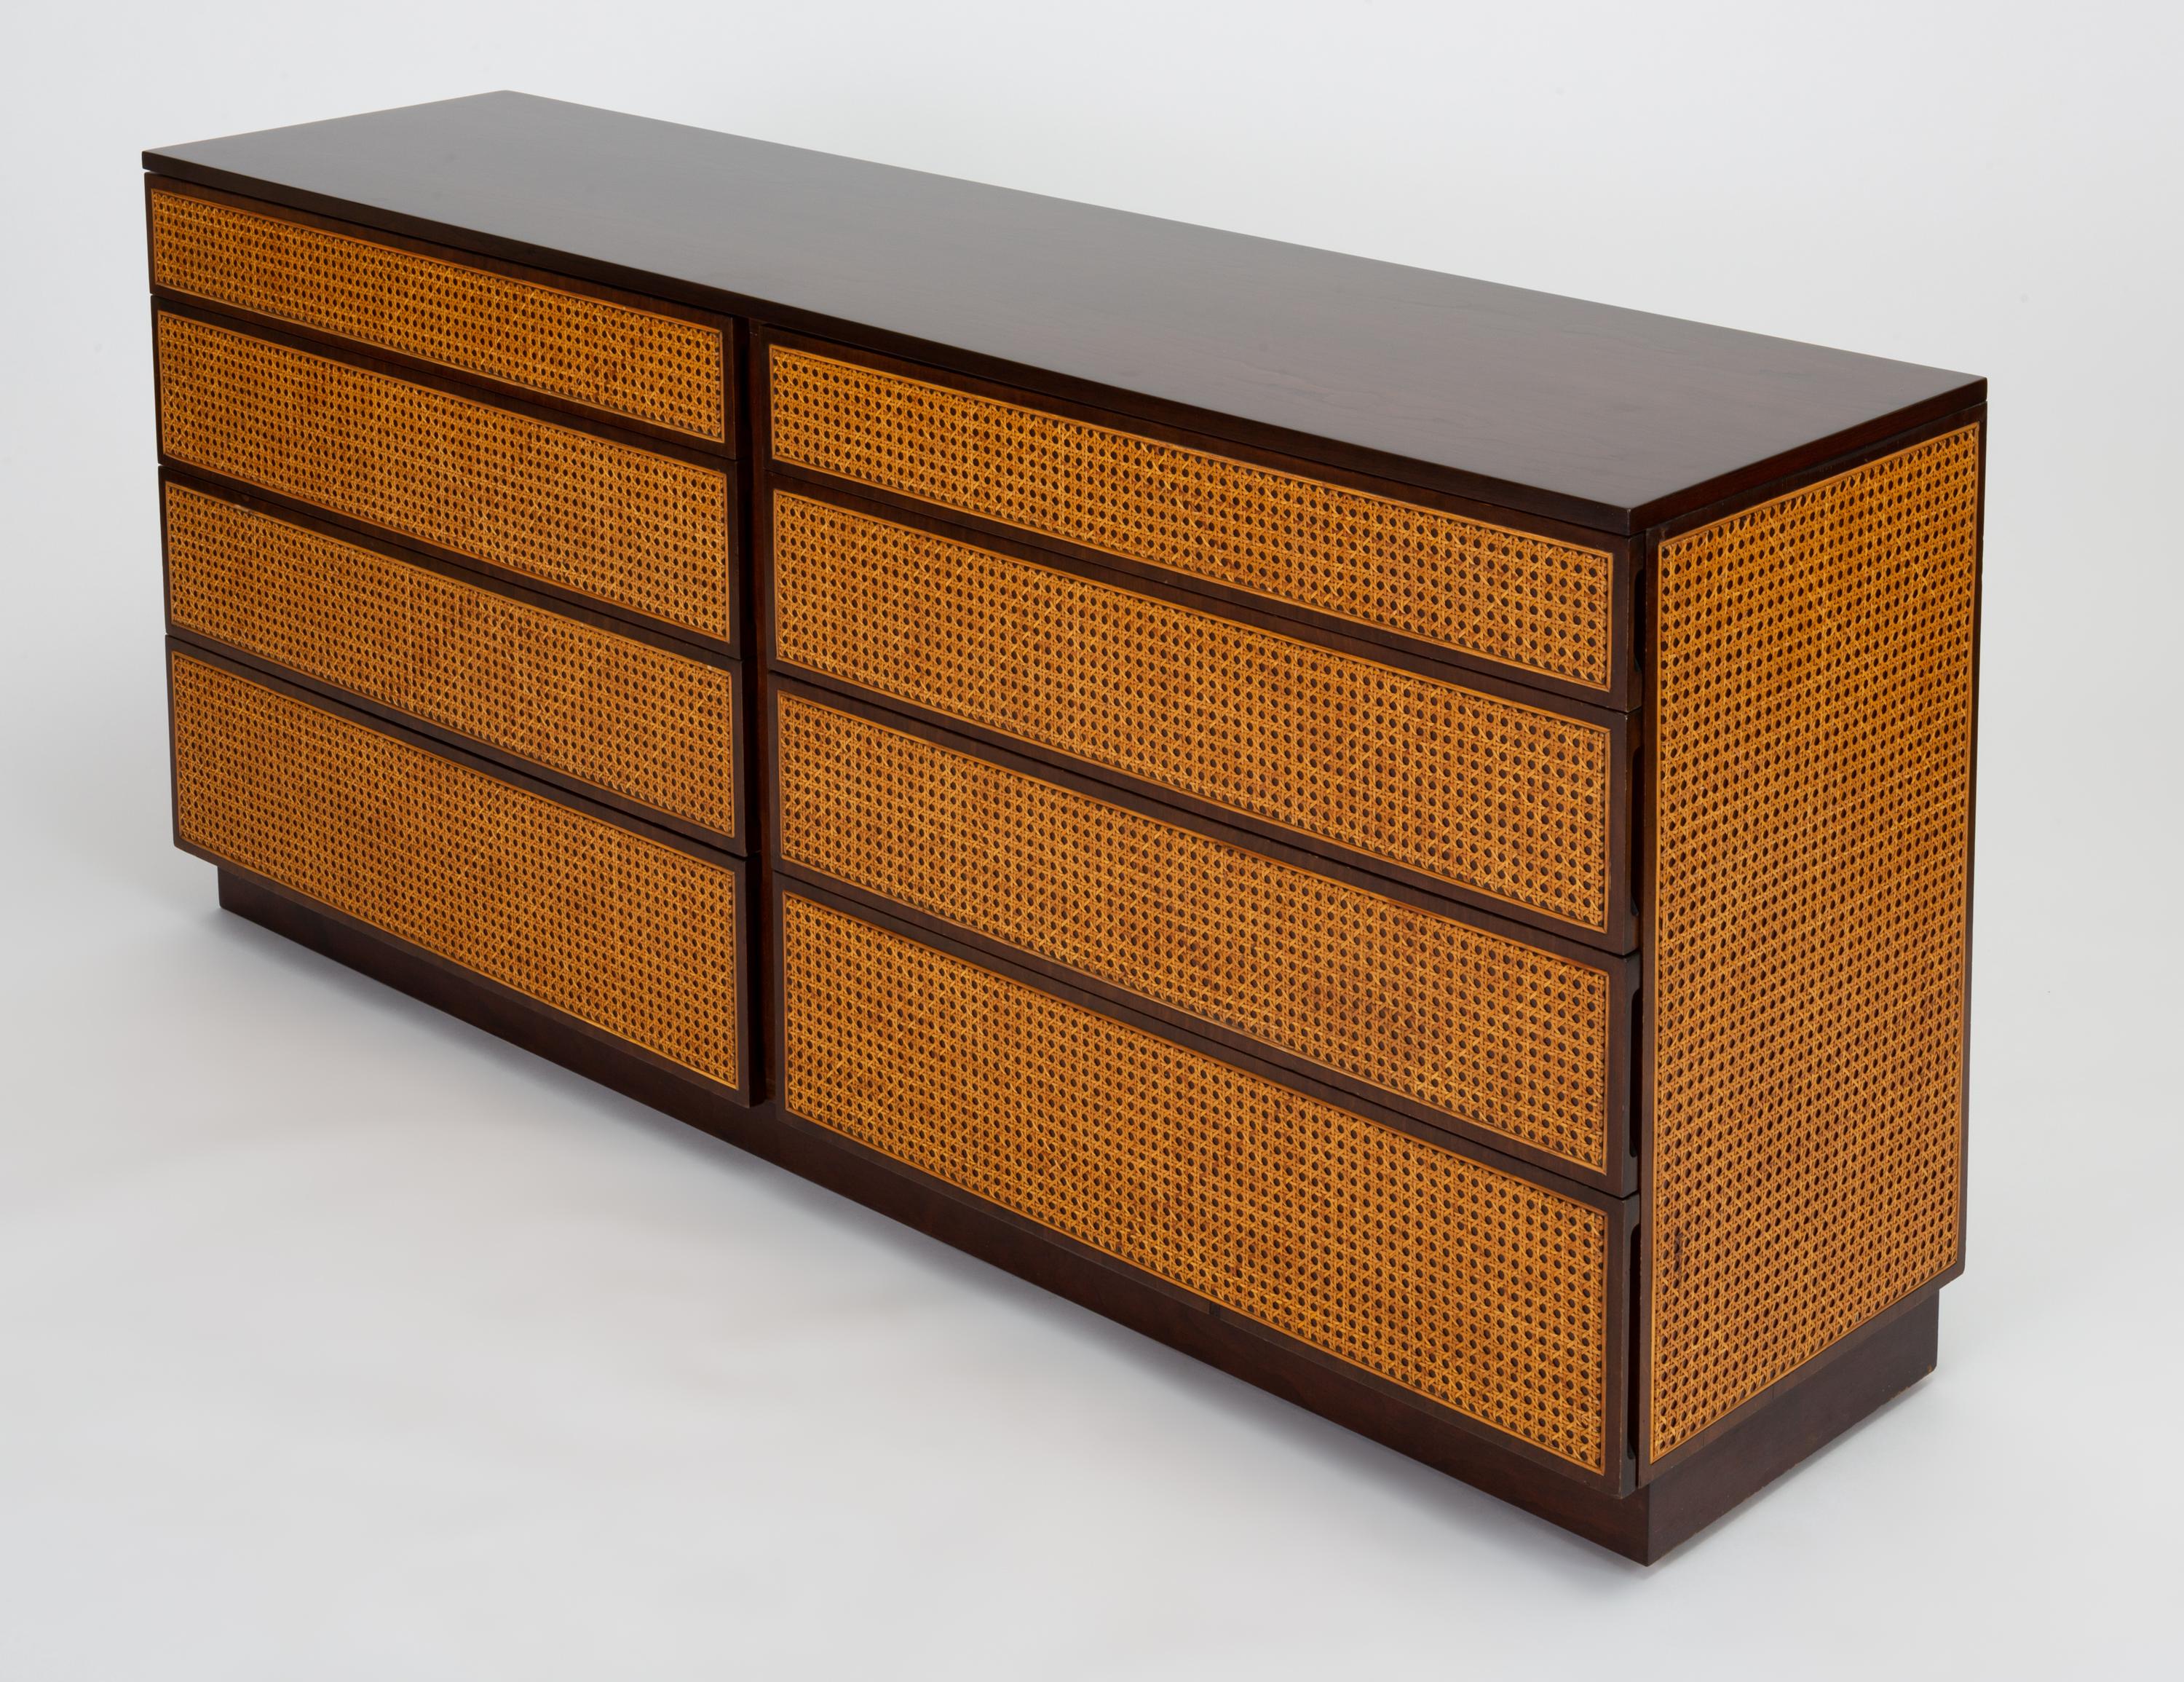 Mid-Century Modern Eight Drawer Dresser with Woven Cane Paneling from Directional Custom Collection